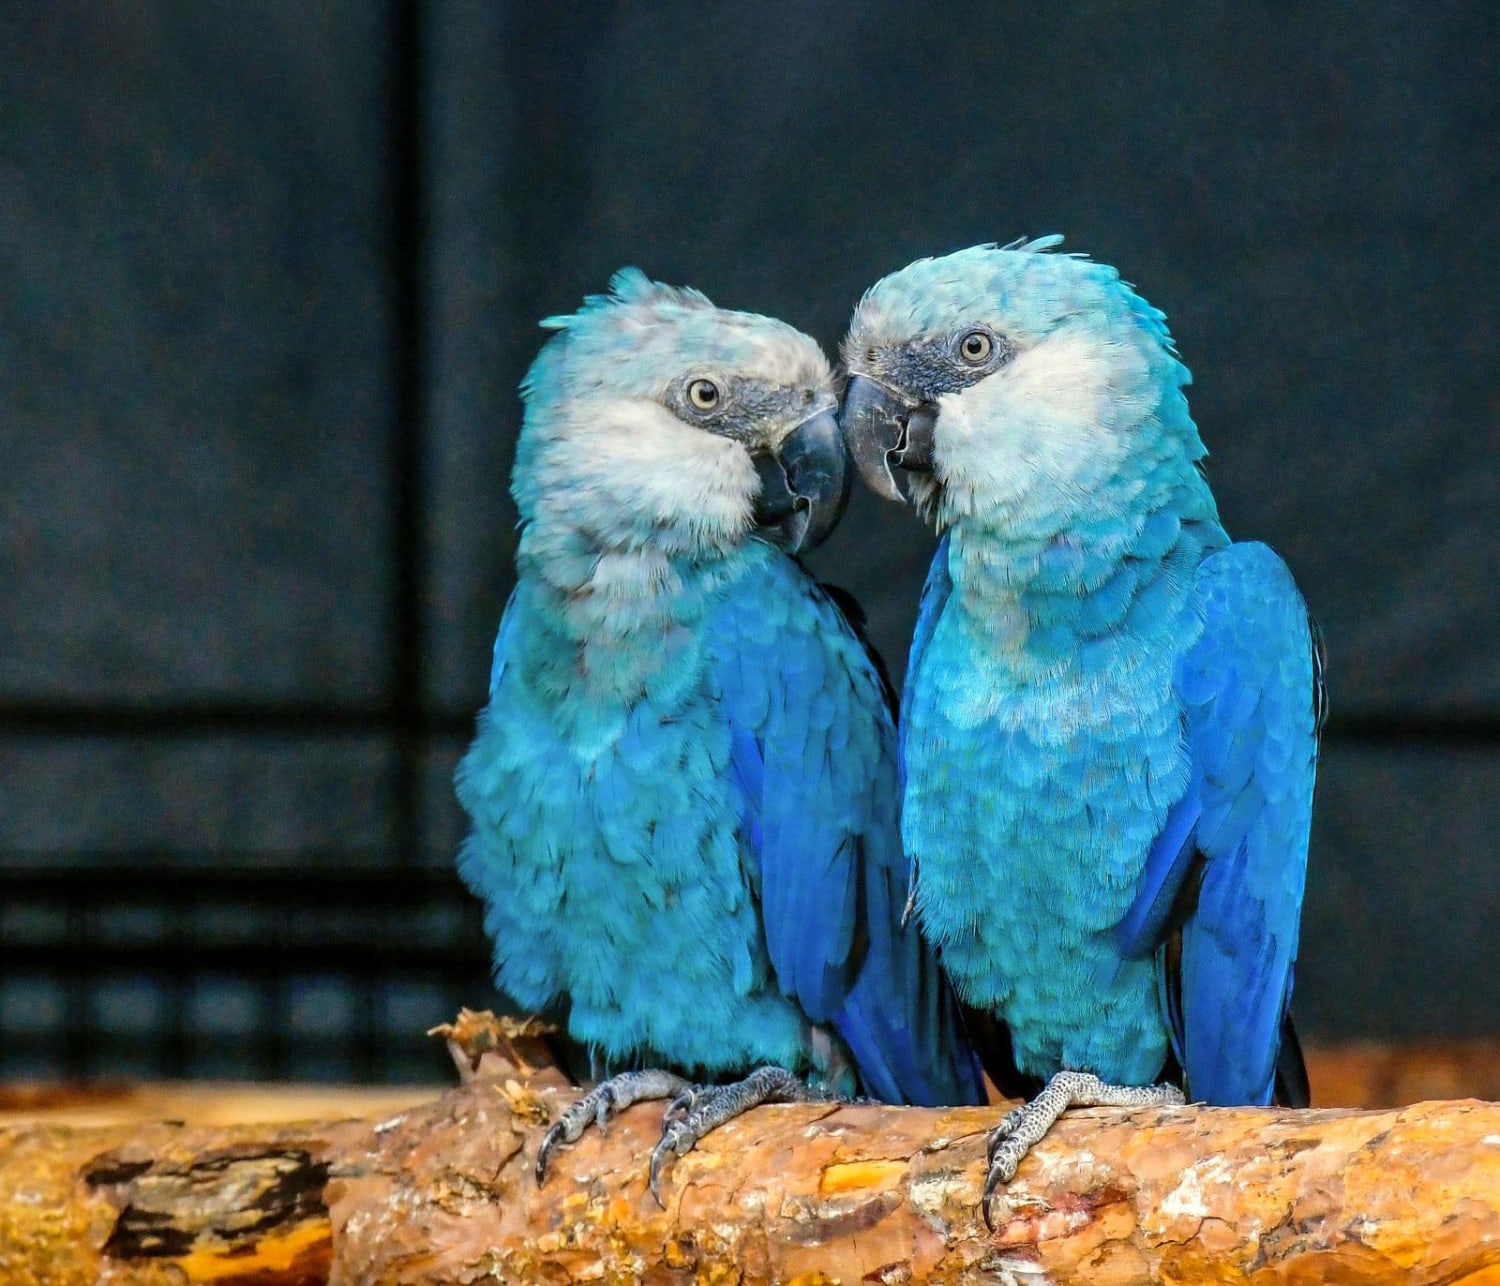 After vanishing in the wild for more than two decades, Spix's macaws have recently been re-introduced back into their native Brazil after an ambitious and successful breeding program. They are also called little blue macaws, and their weight averages around 300 grams (11 oz).